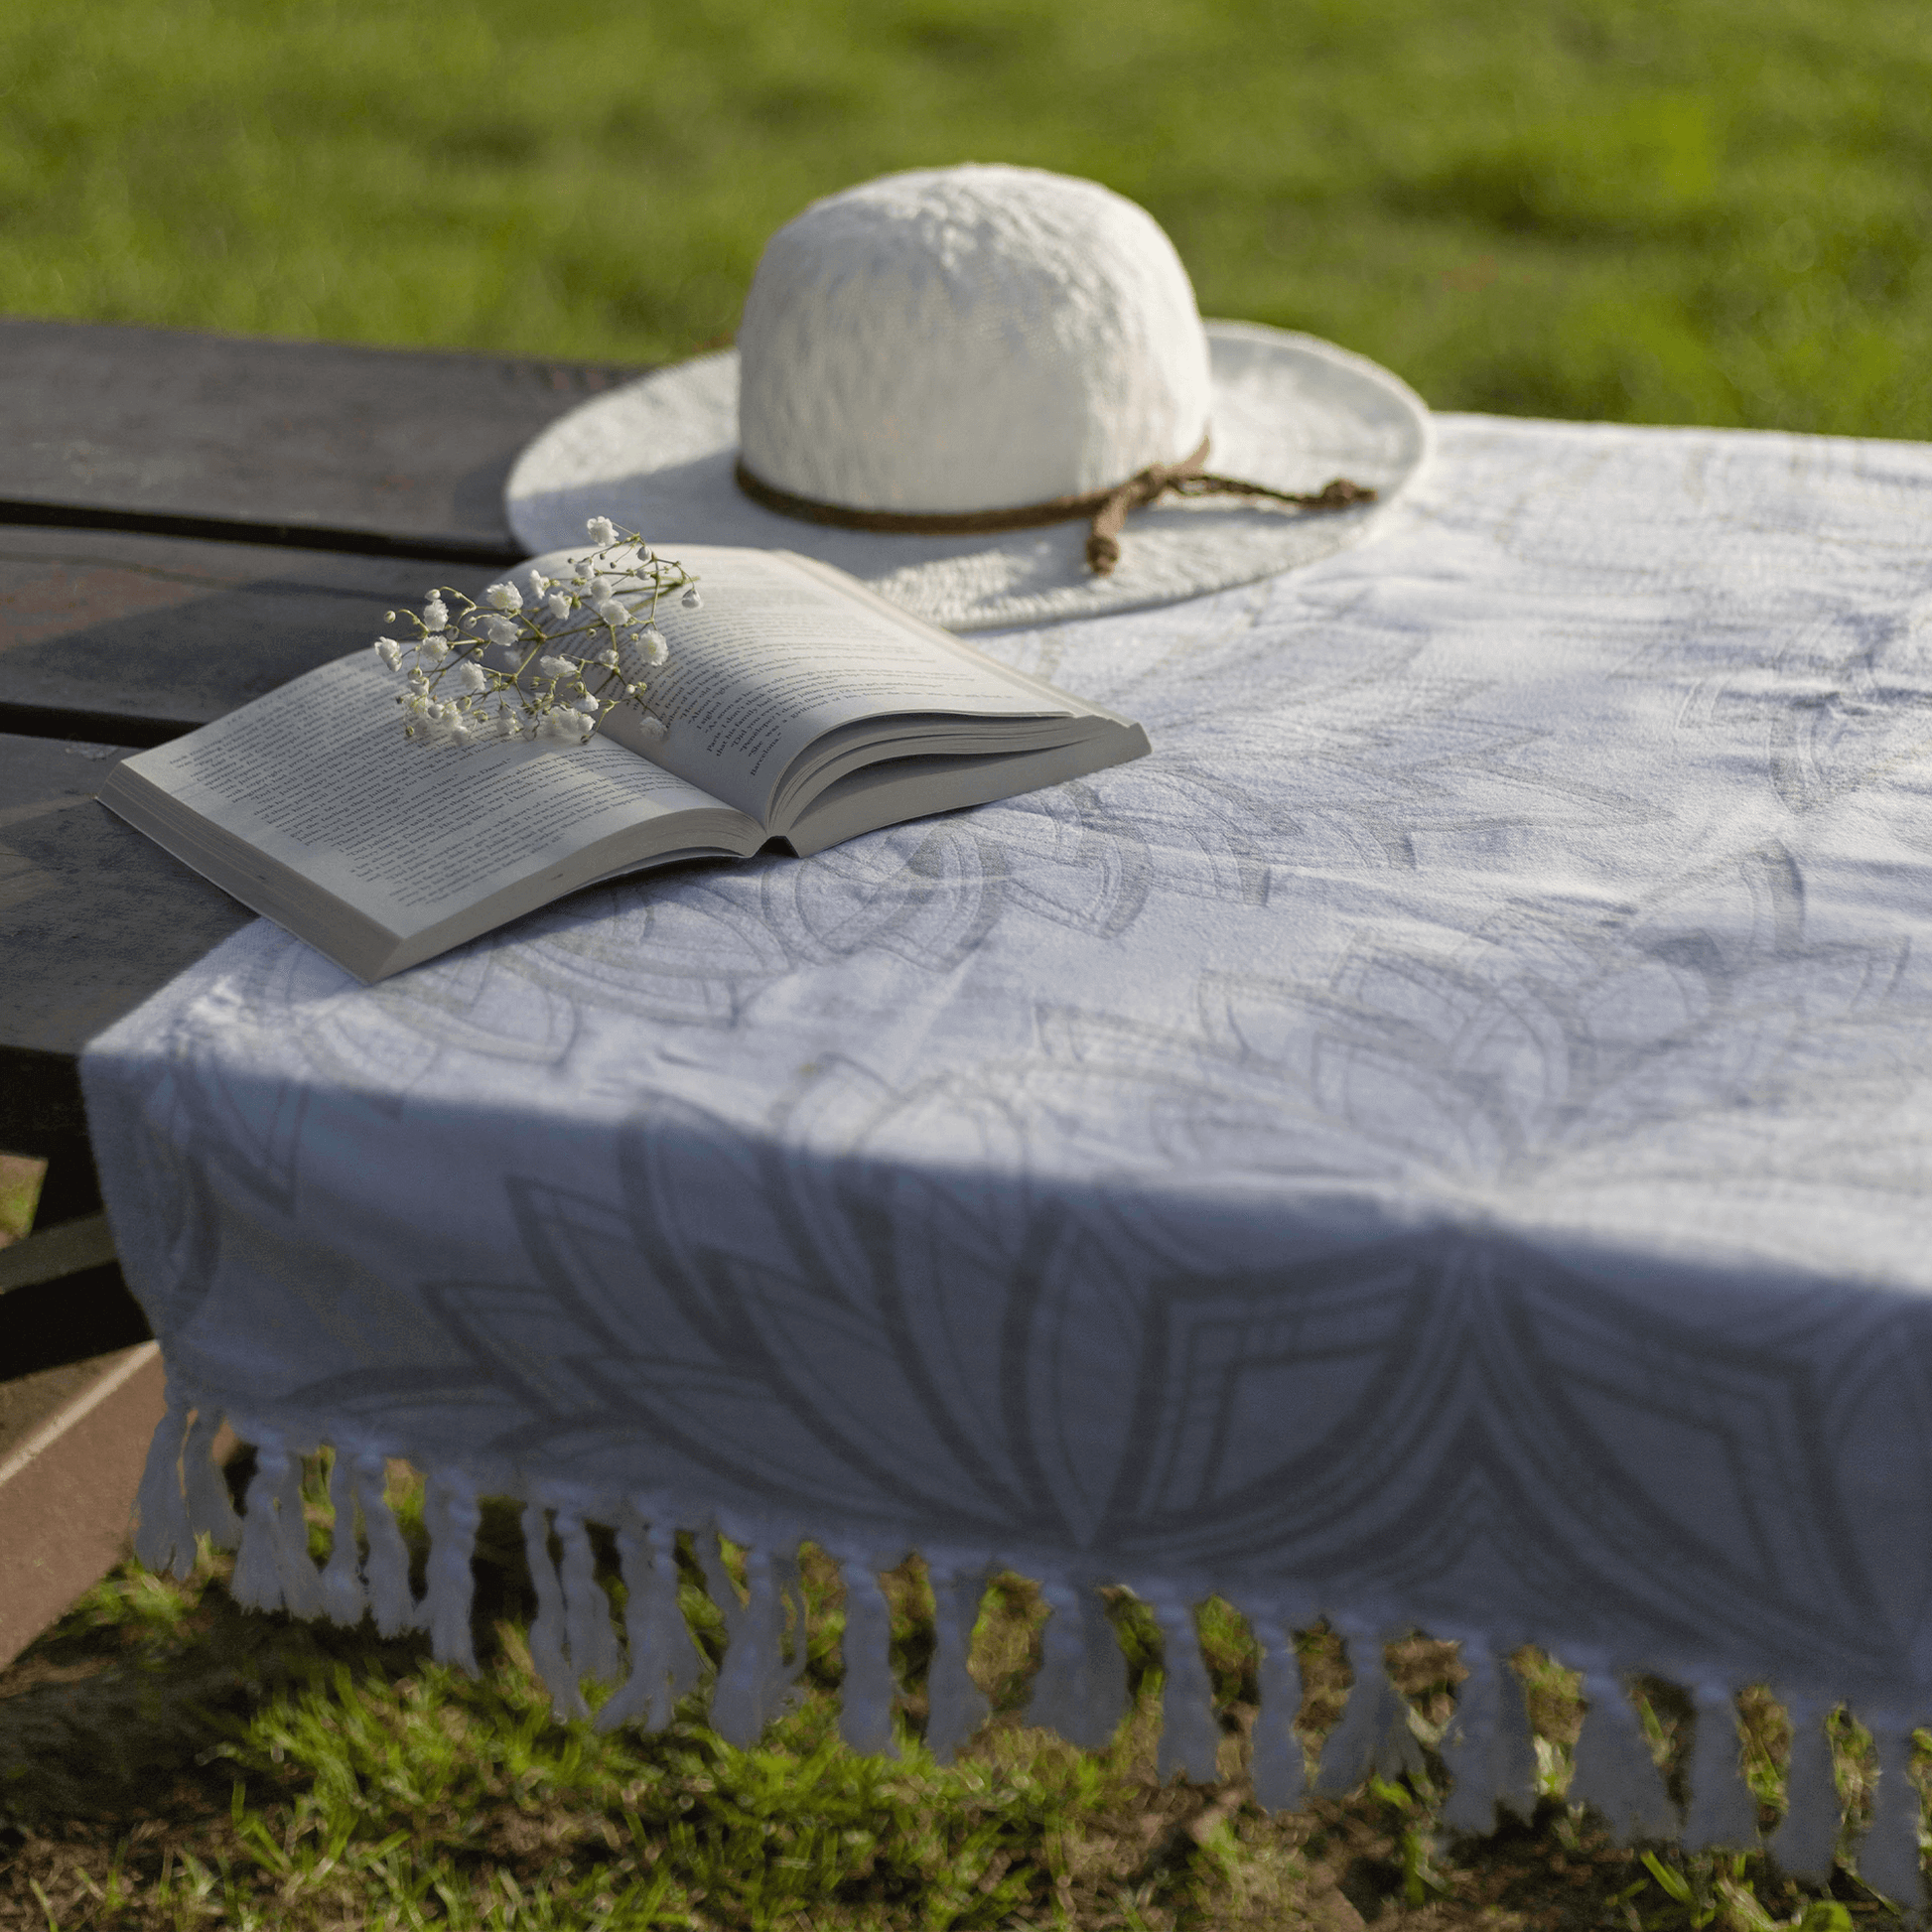 Grey and white Turkish cotton towel used as a picnic table cloth in the summer sun with a had book and sprig of babies breath flowers